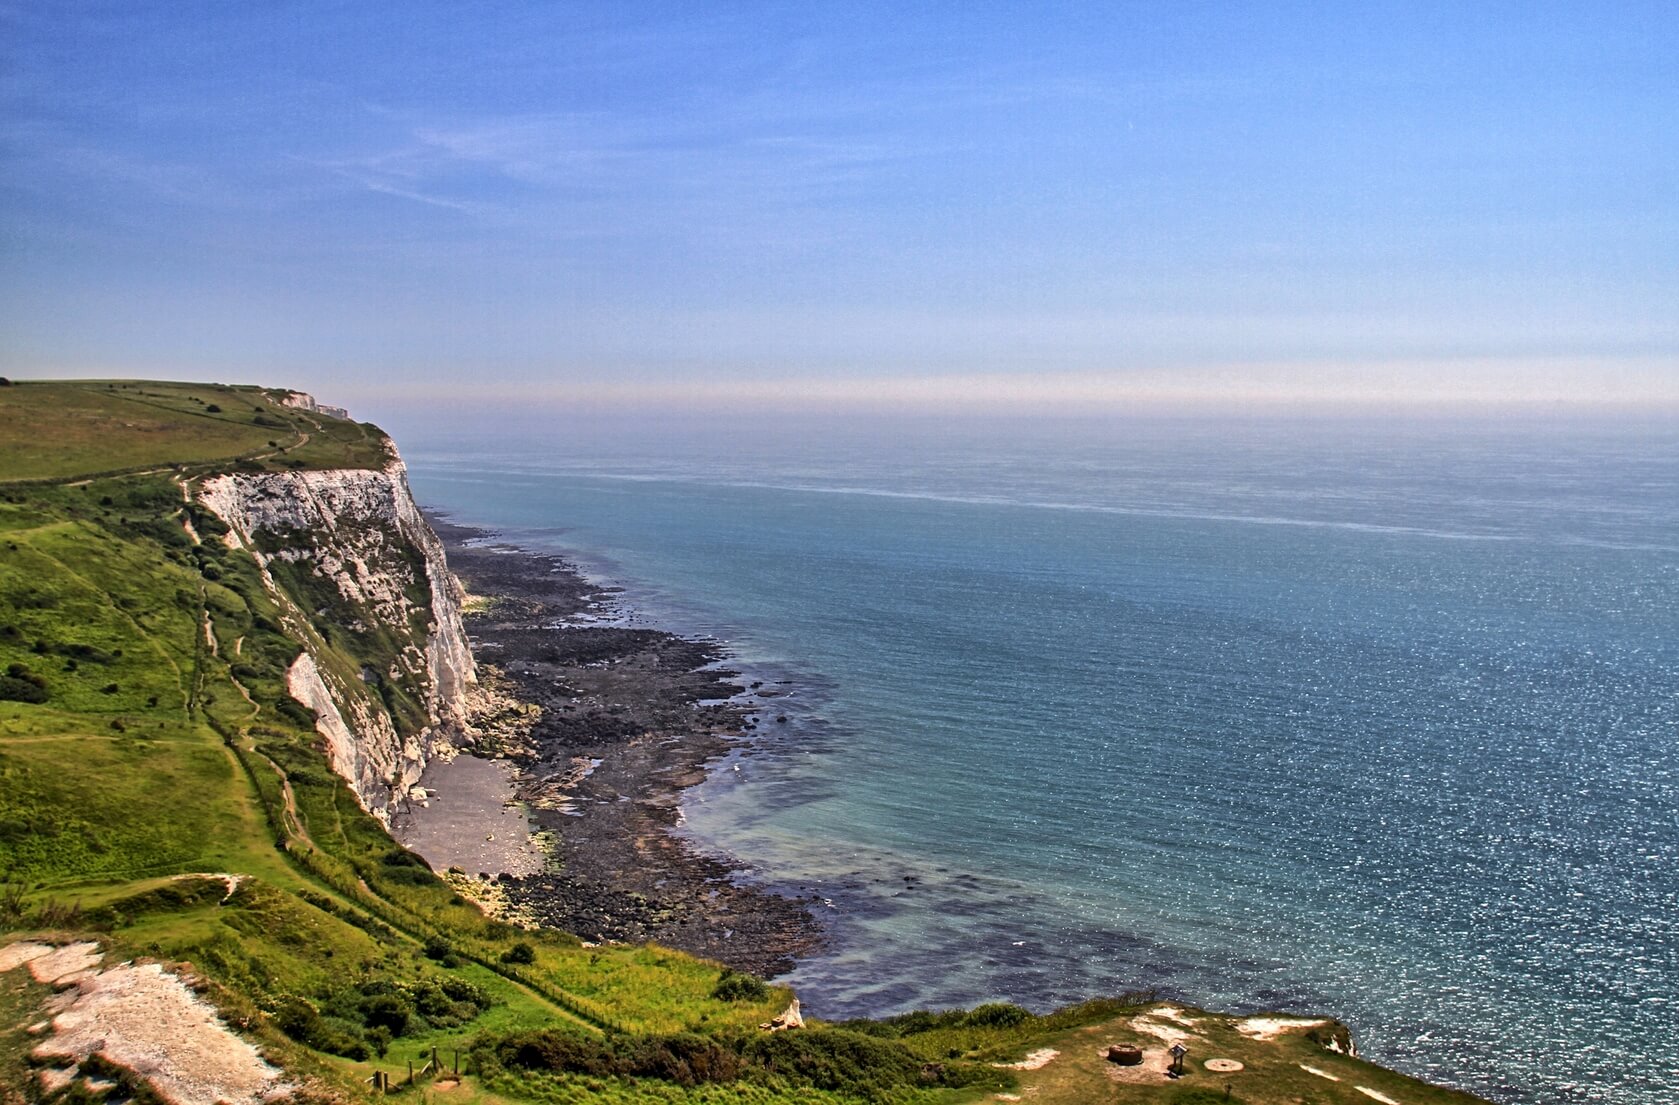 A landscape shot of the famed Cliffs of Dover. The cliffs overlook the ocean, which share the same proportion of the shot. Seabourn cruises visit the Cliffs of Dover